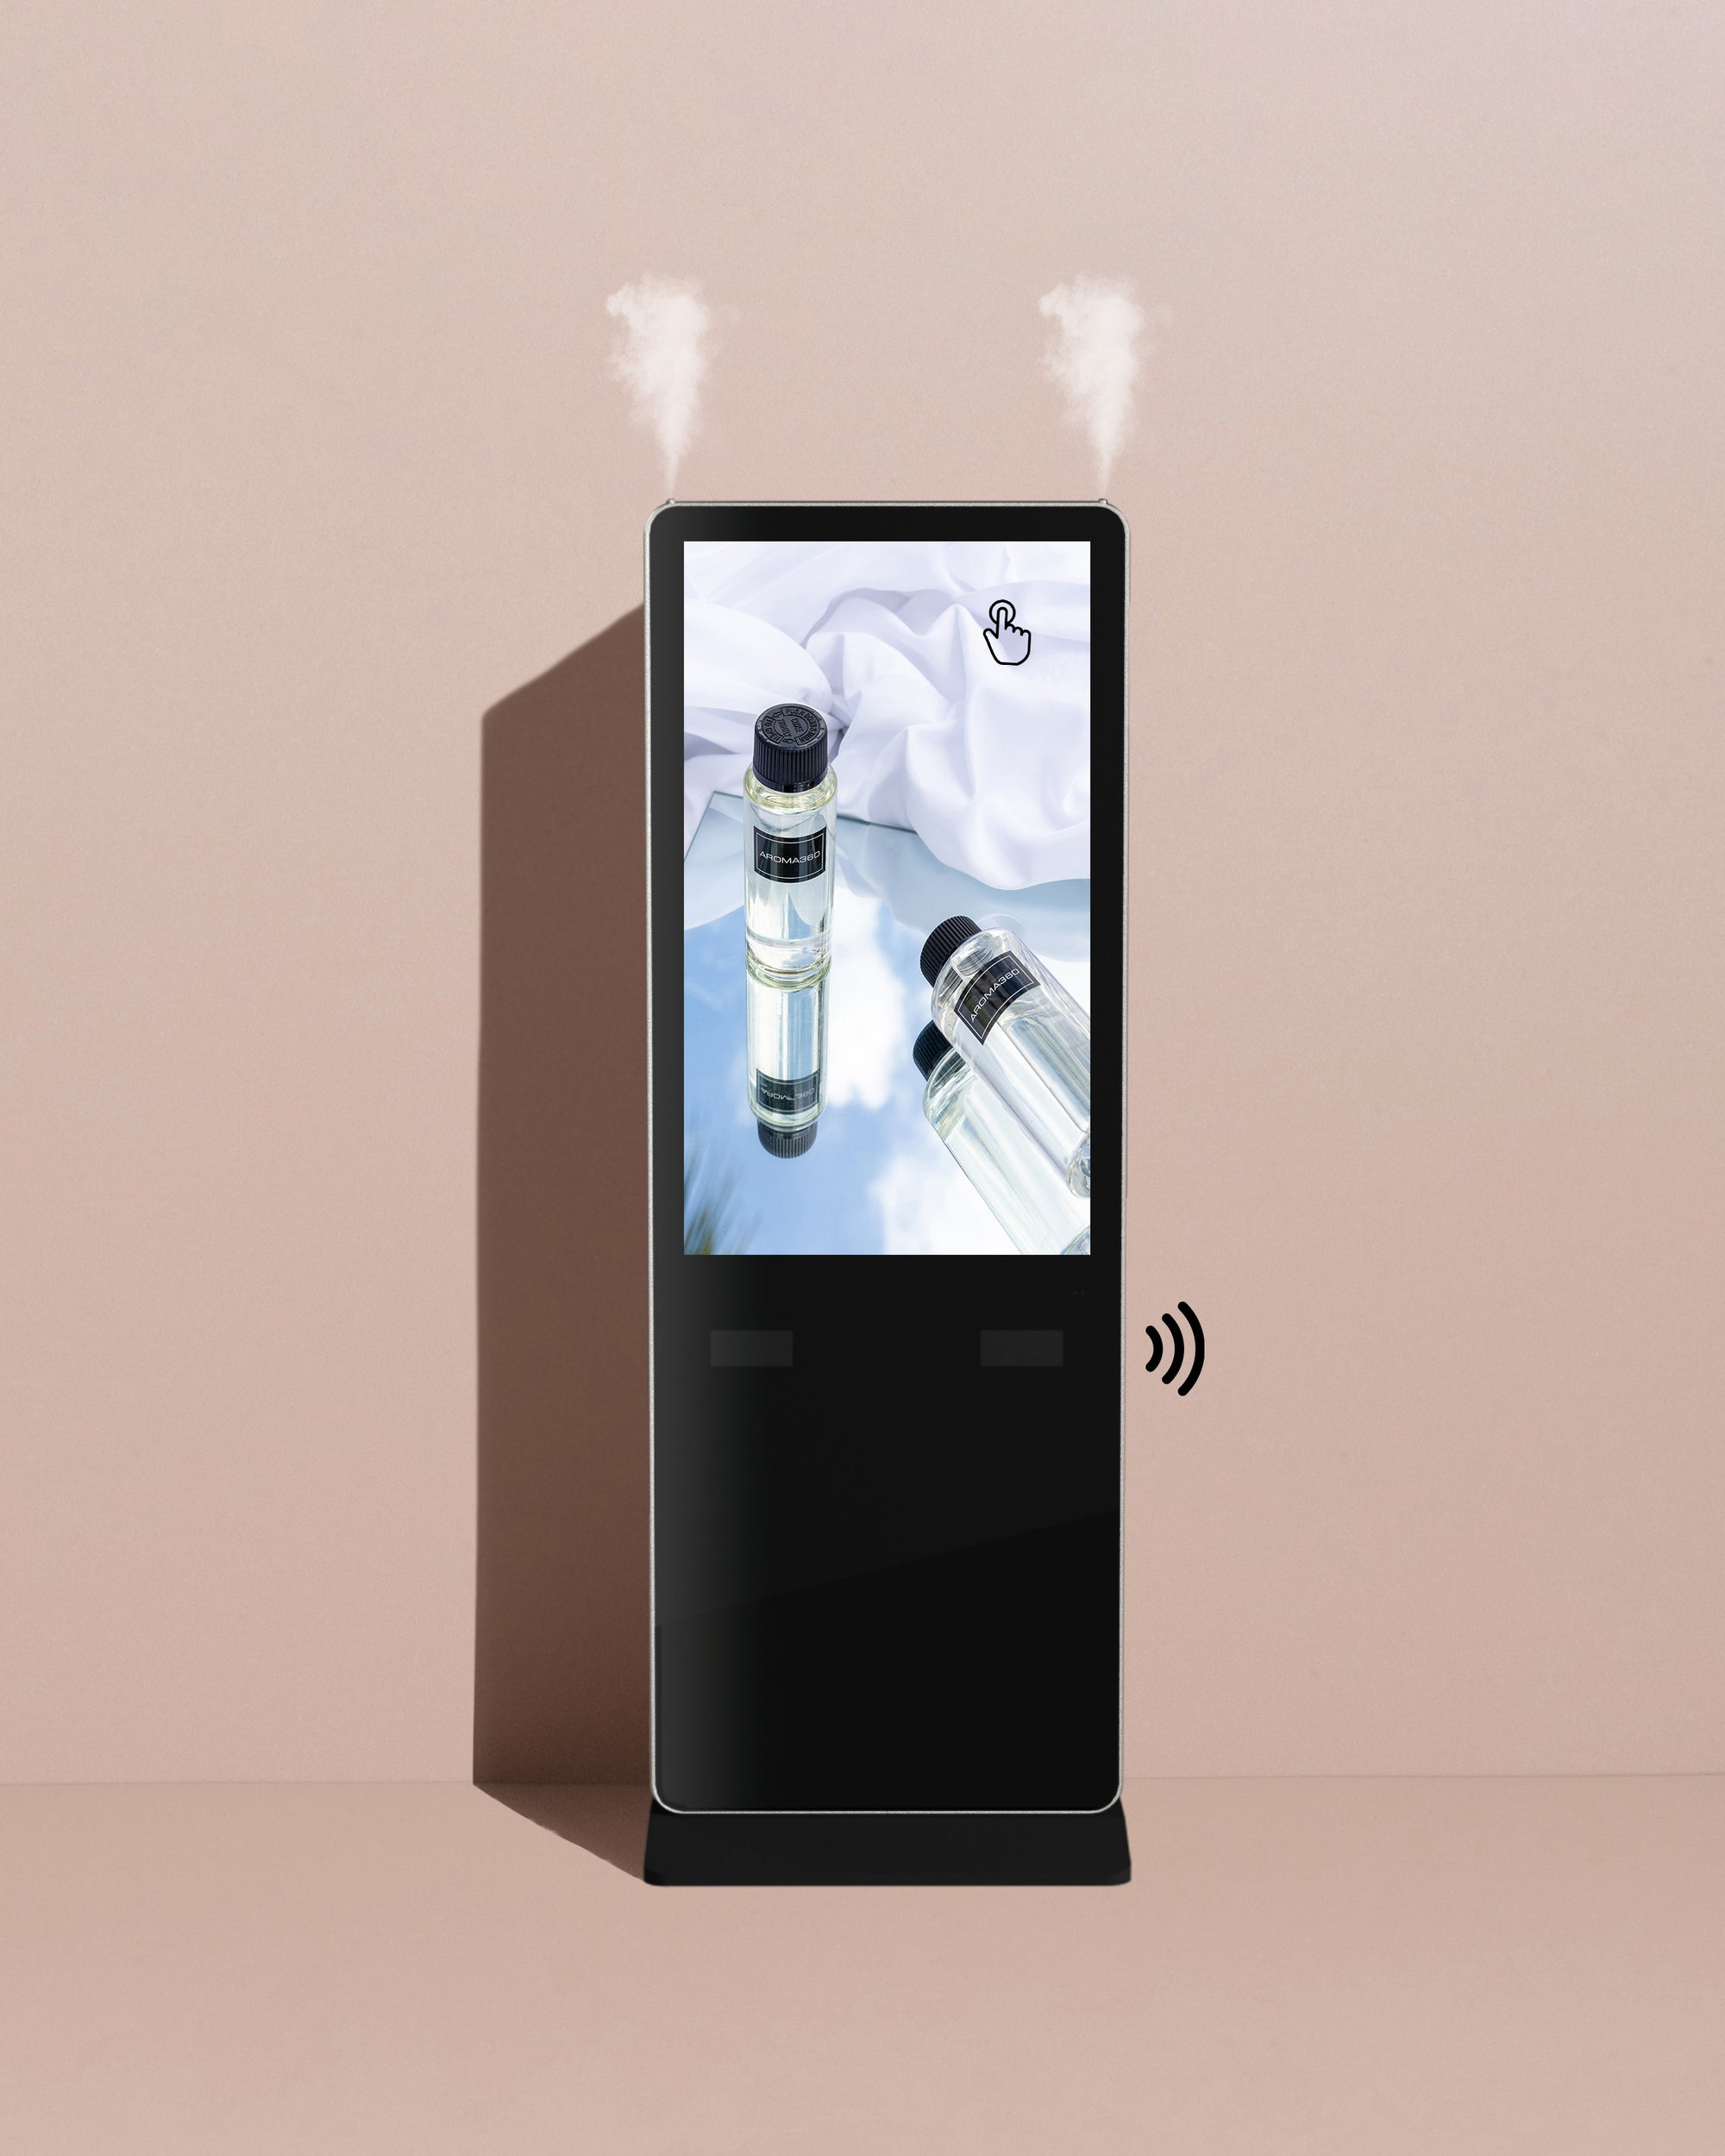 NEW Product Spotlight: The Interactive Scenting Kiosk